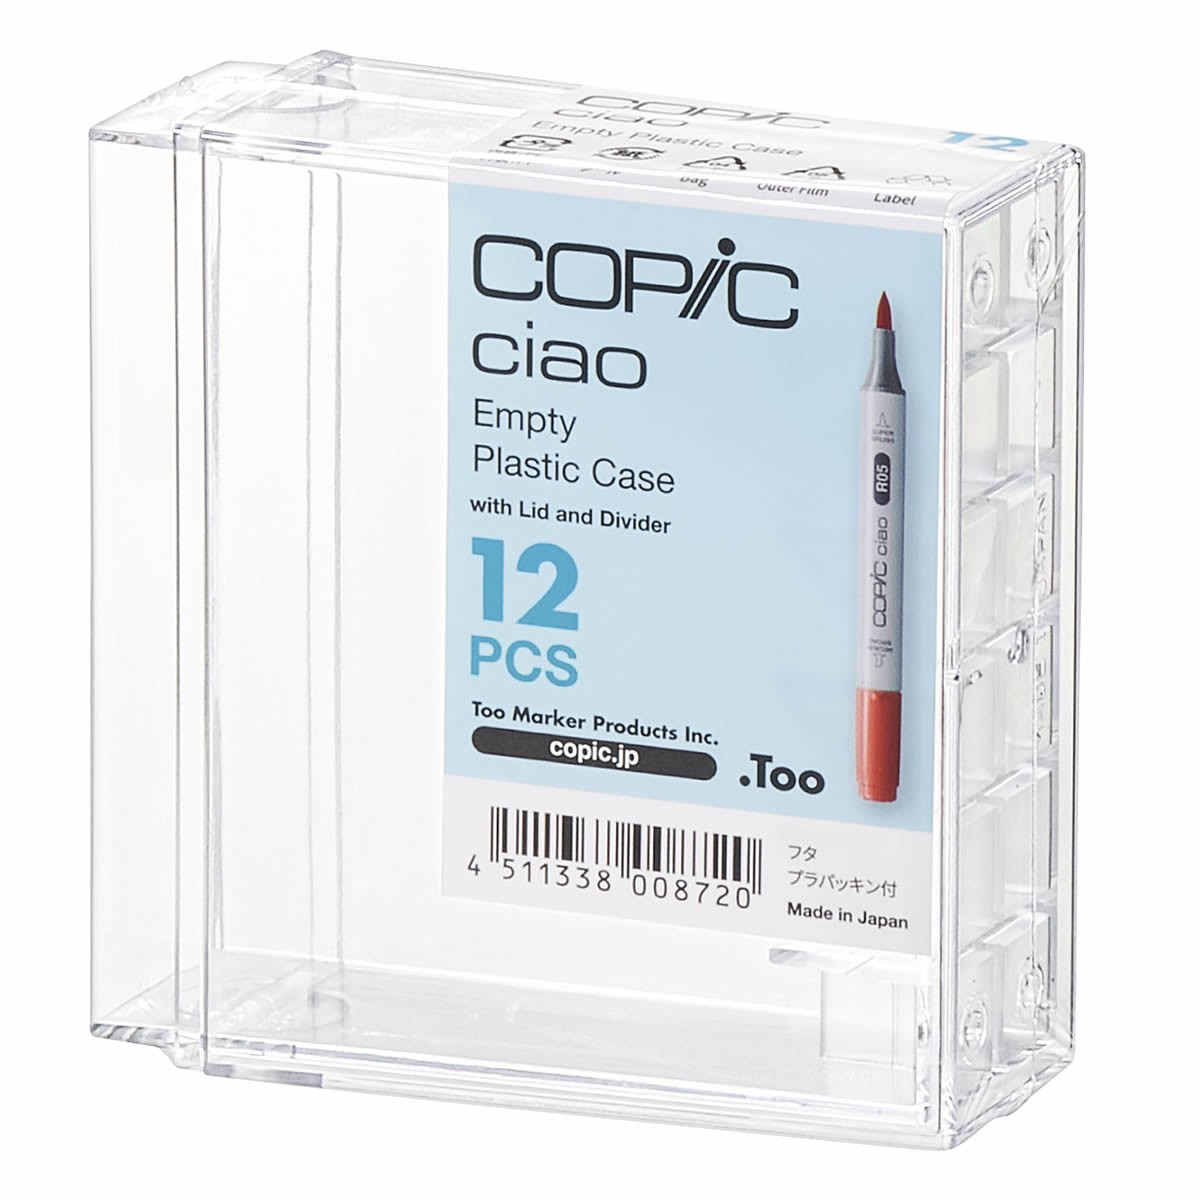 Copic Ciao Empty Plastic Case for 12 markers